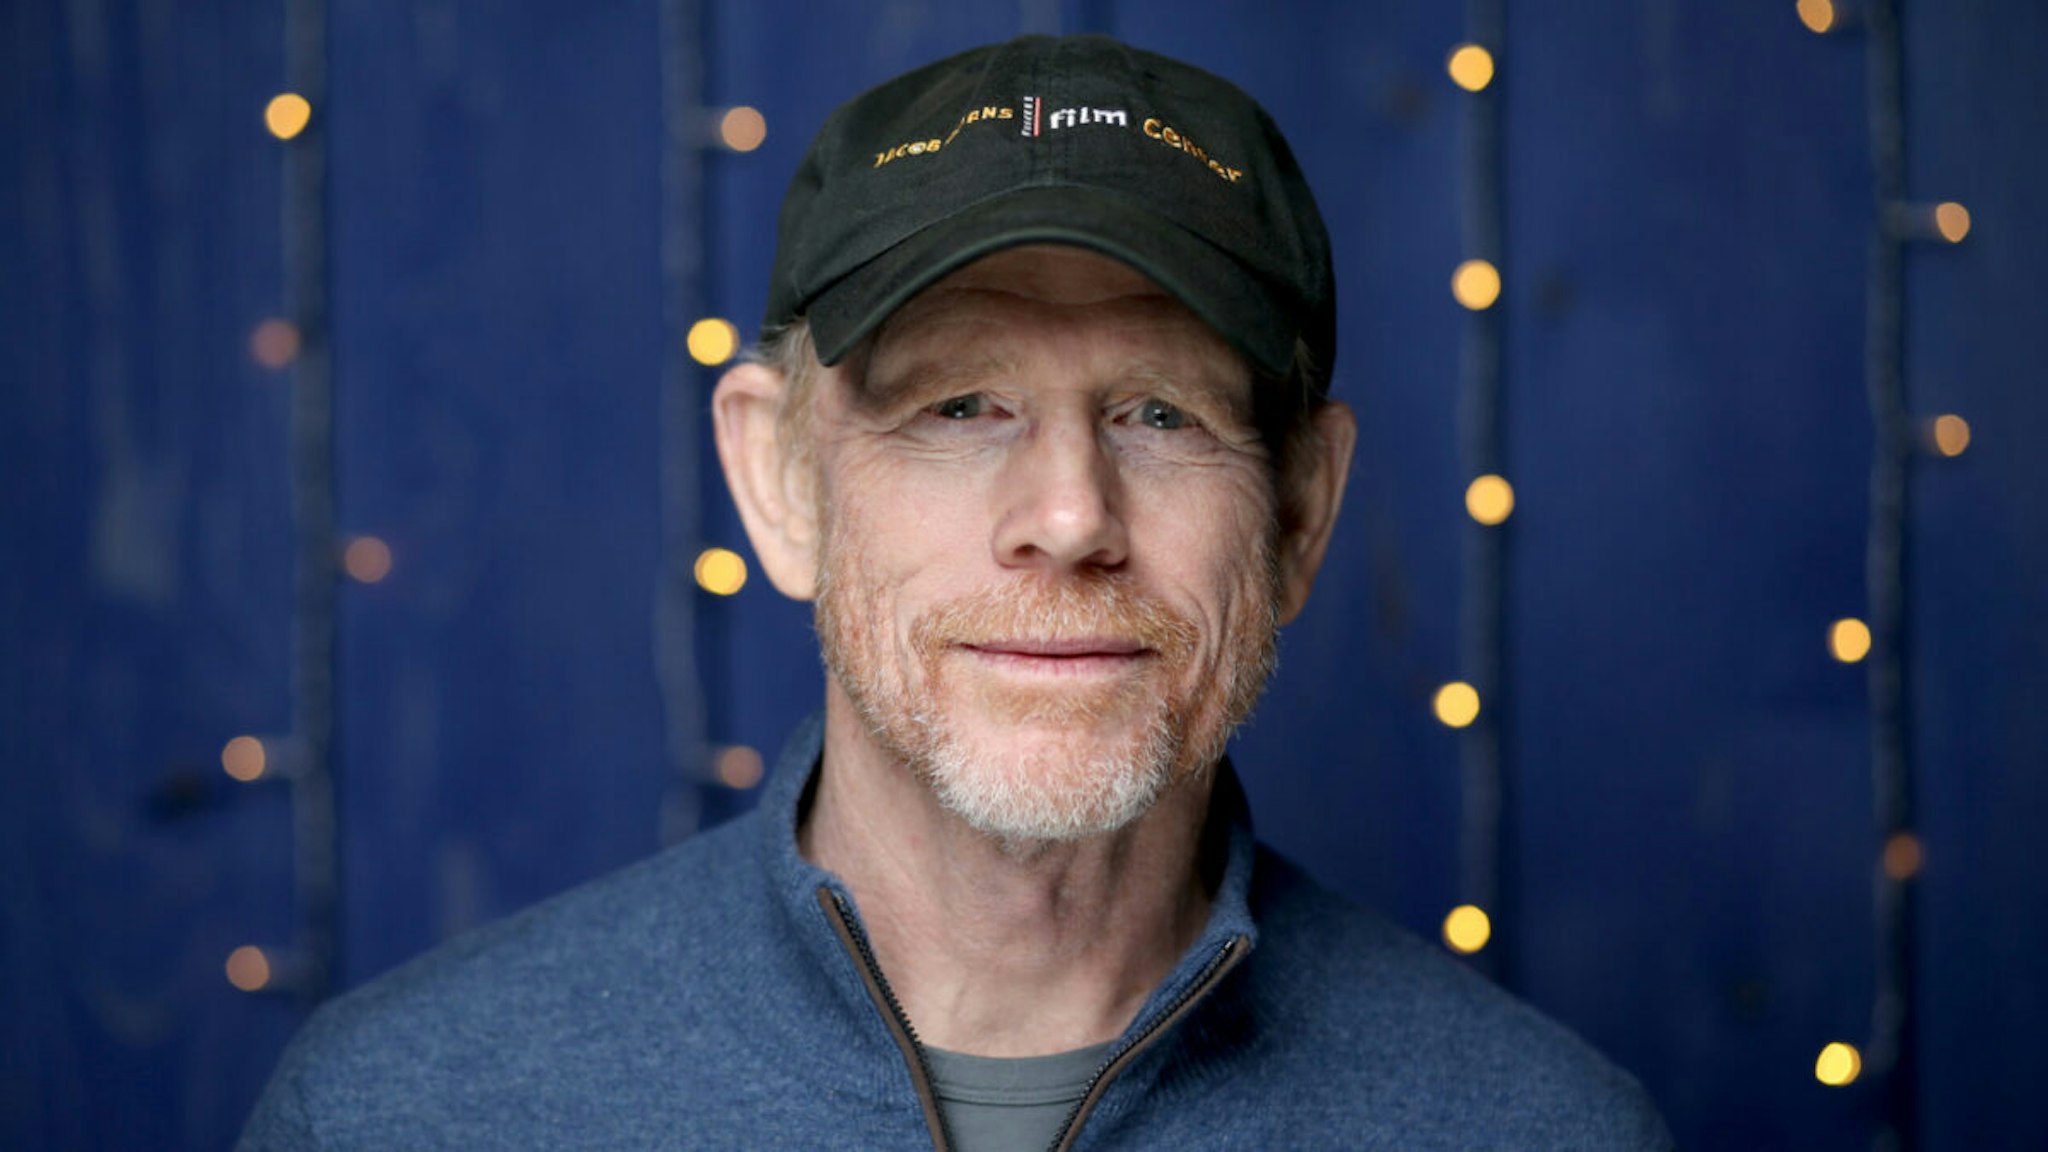 Ron Howard of 'Rebuilding Paradise' attends the IMDb Studio at Acura Festival Village on location at the 2020 Sundance Film Festival – Day 1 on January 24, 2020 in Park City, Utah.